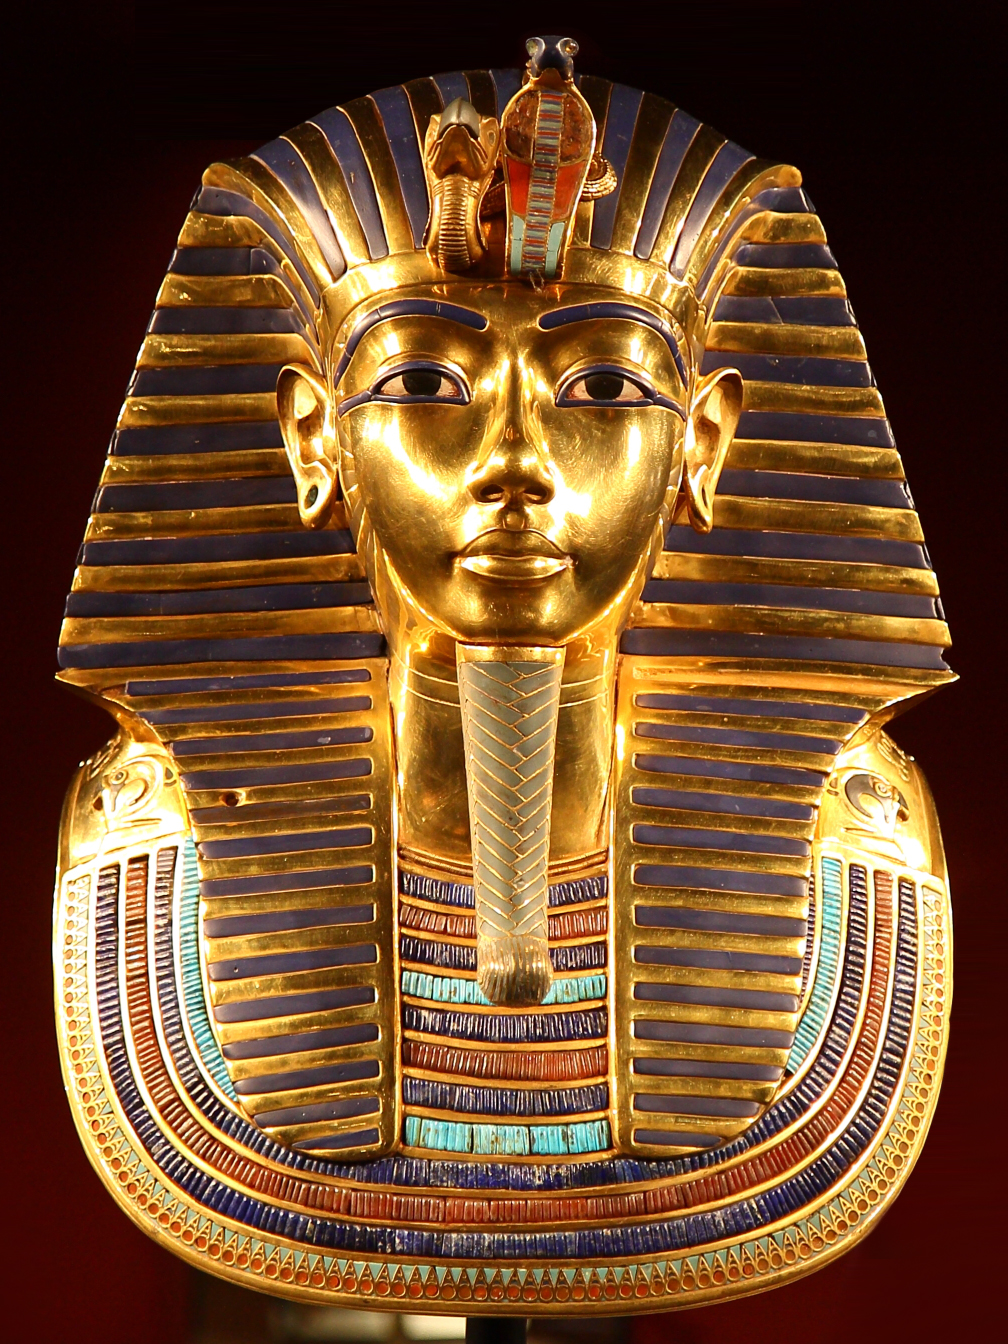 How old was King Tut when he died?